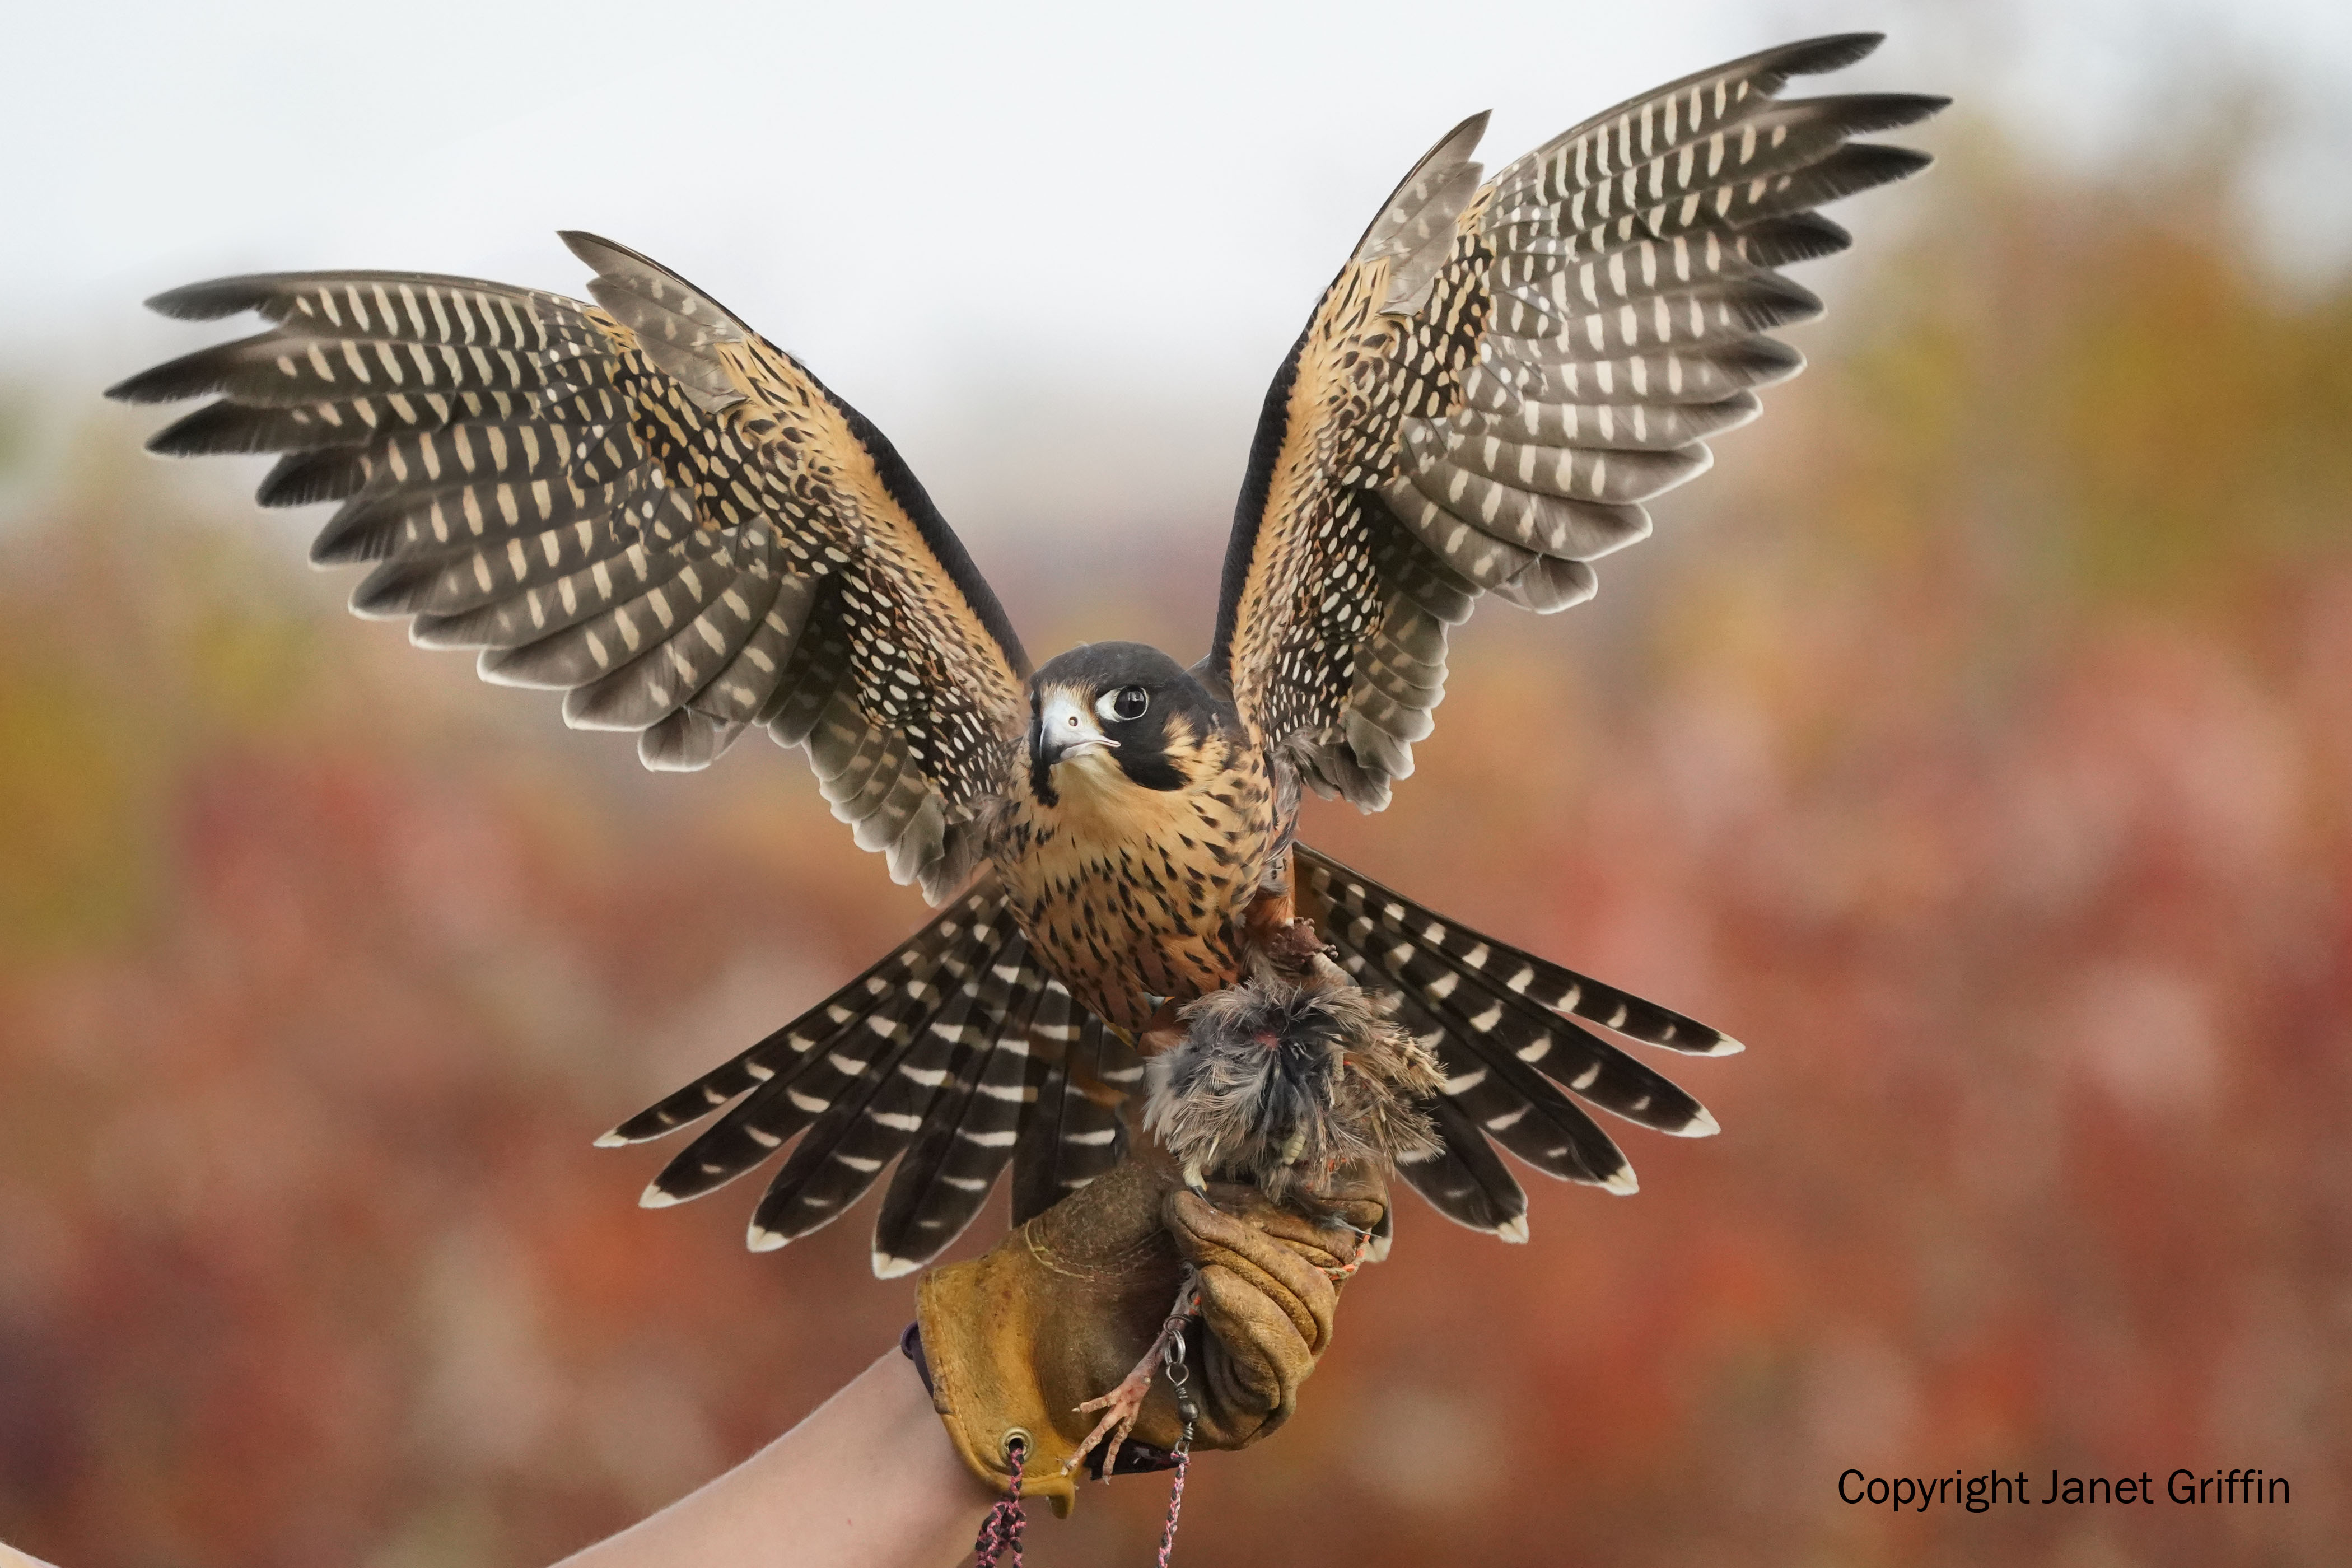 A falcon takes off from the glove of a handler